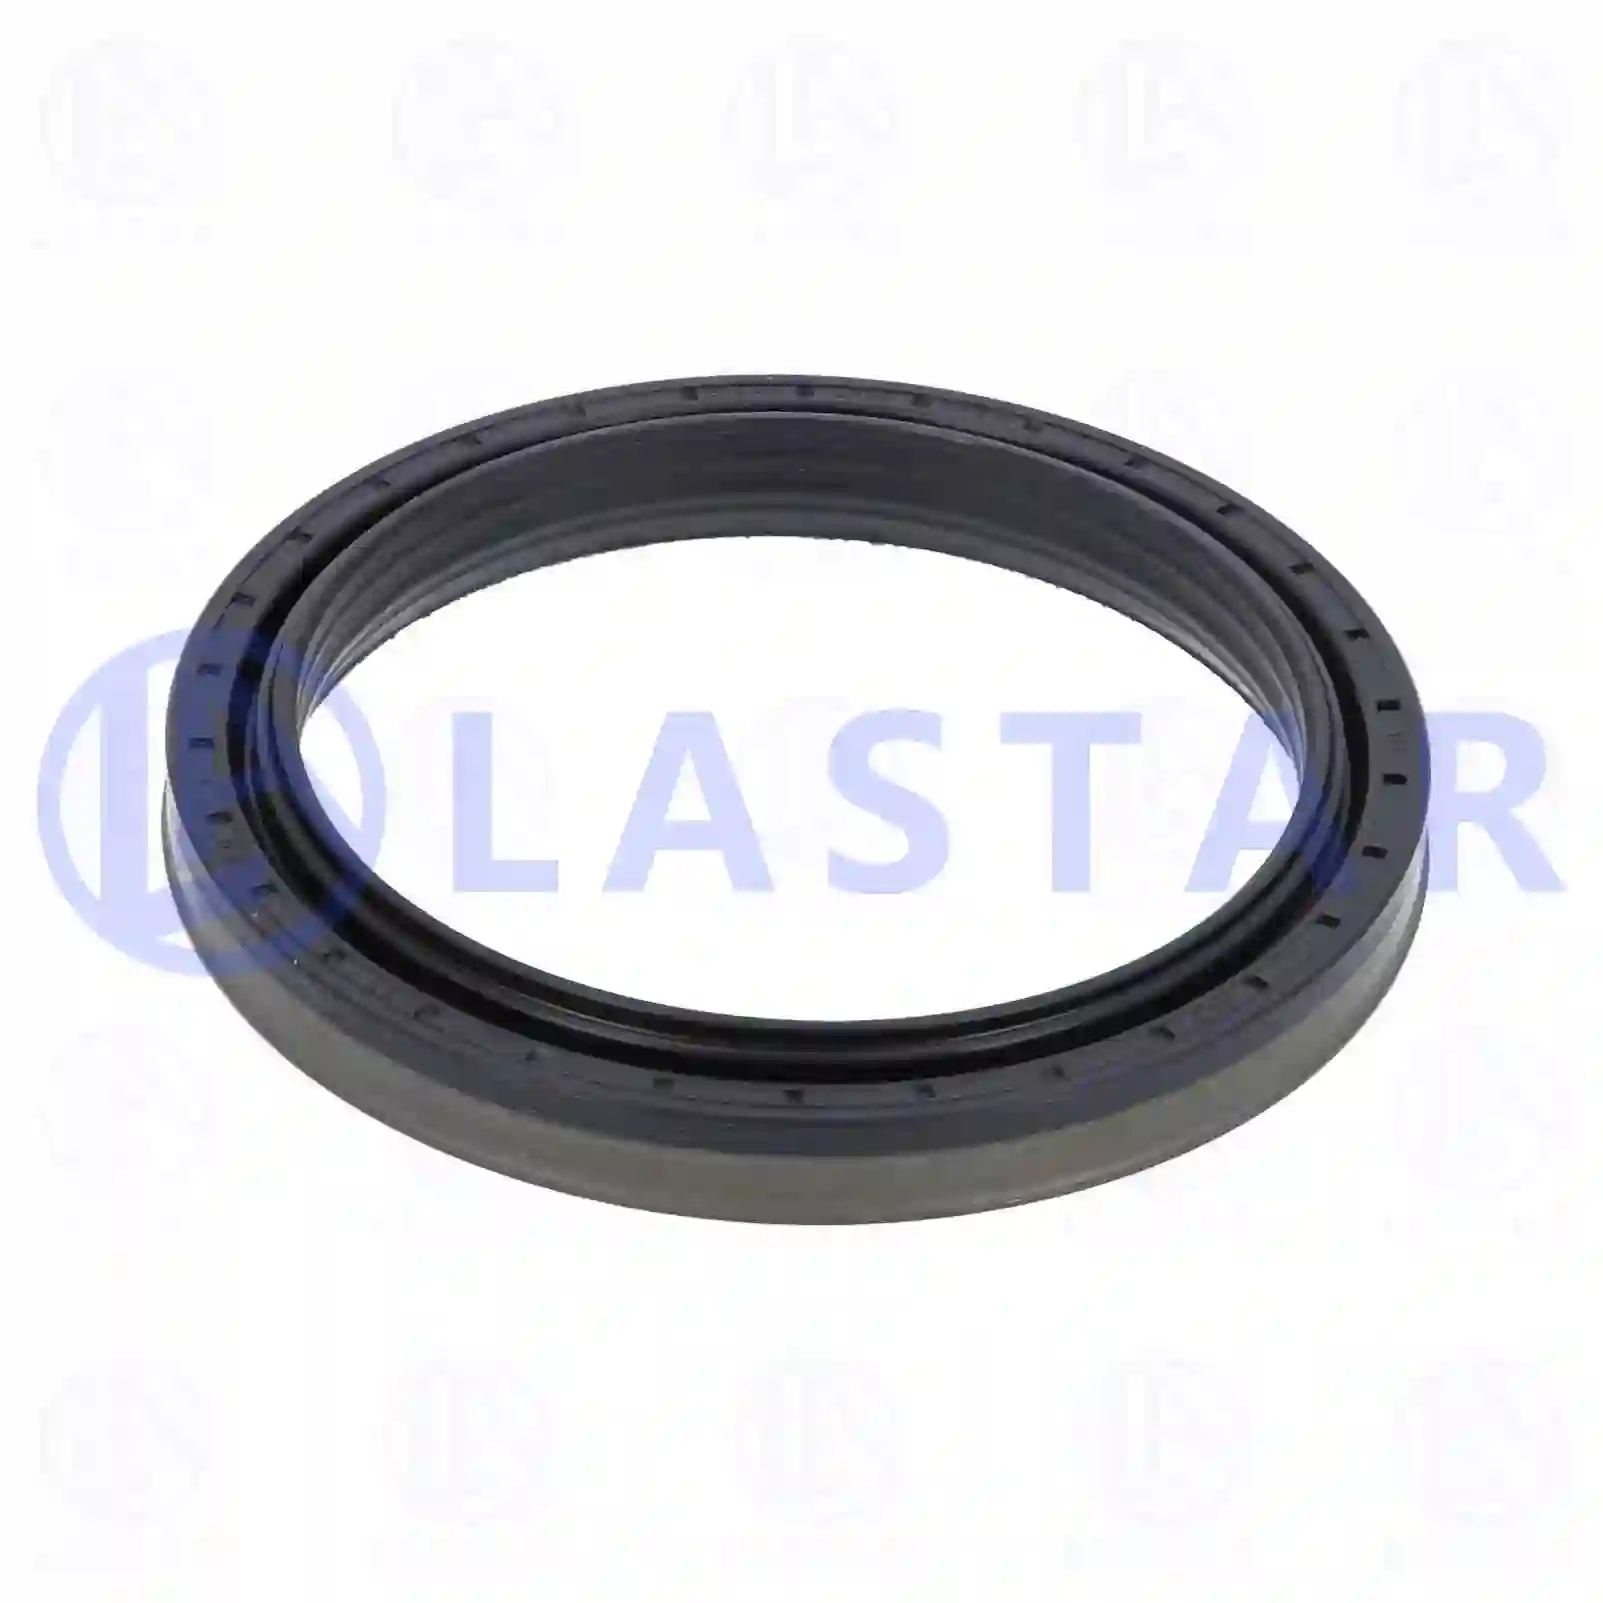 Oil seal, 77726206, 0169970245, 0219976947, , , ||  77726206 Lastar Spare Part | Truck Spare Parts, Auotomotive Spare Parts Oil seal, 77726206, 0169970245, 0219976947, , , ||  77726206 Lastar Spare Part | Truck Spare Parts, Auotomotive Spare Parts